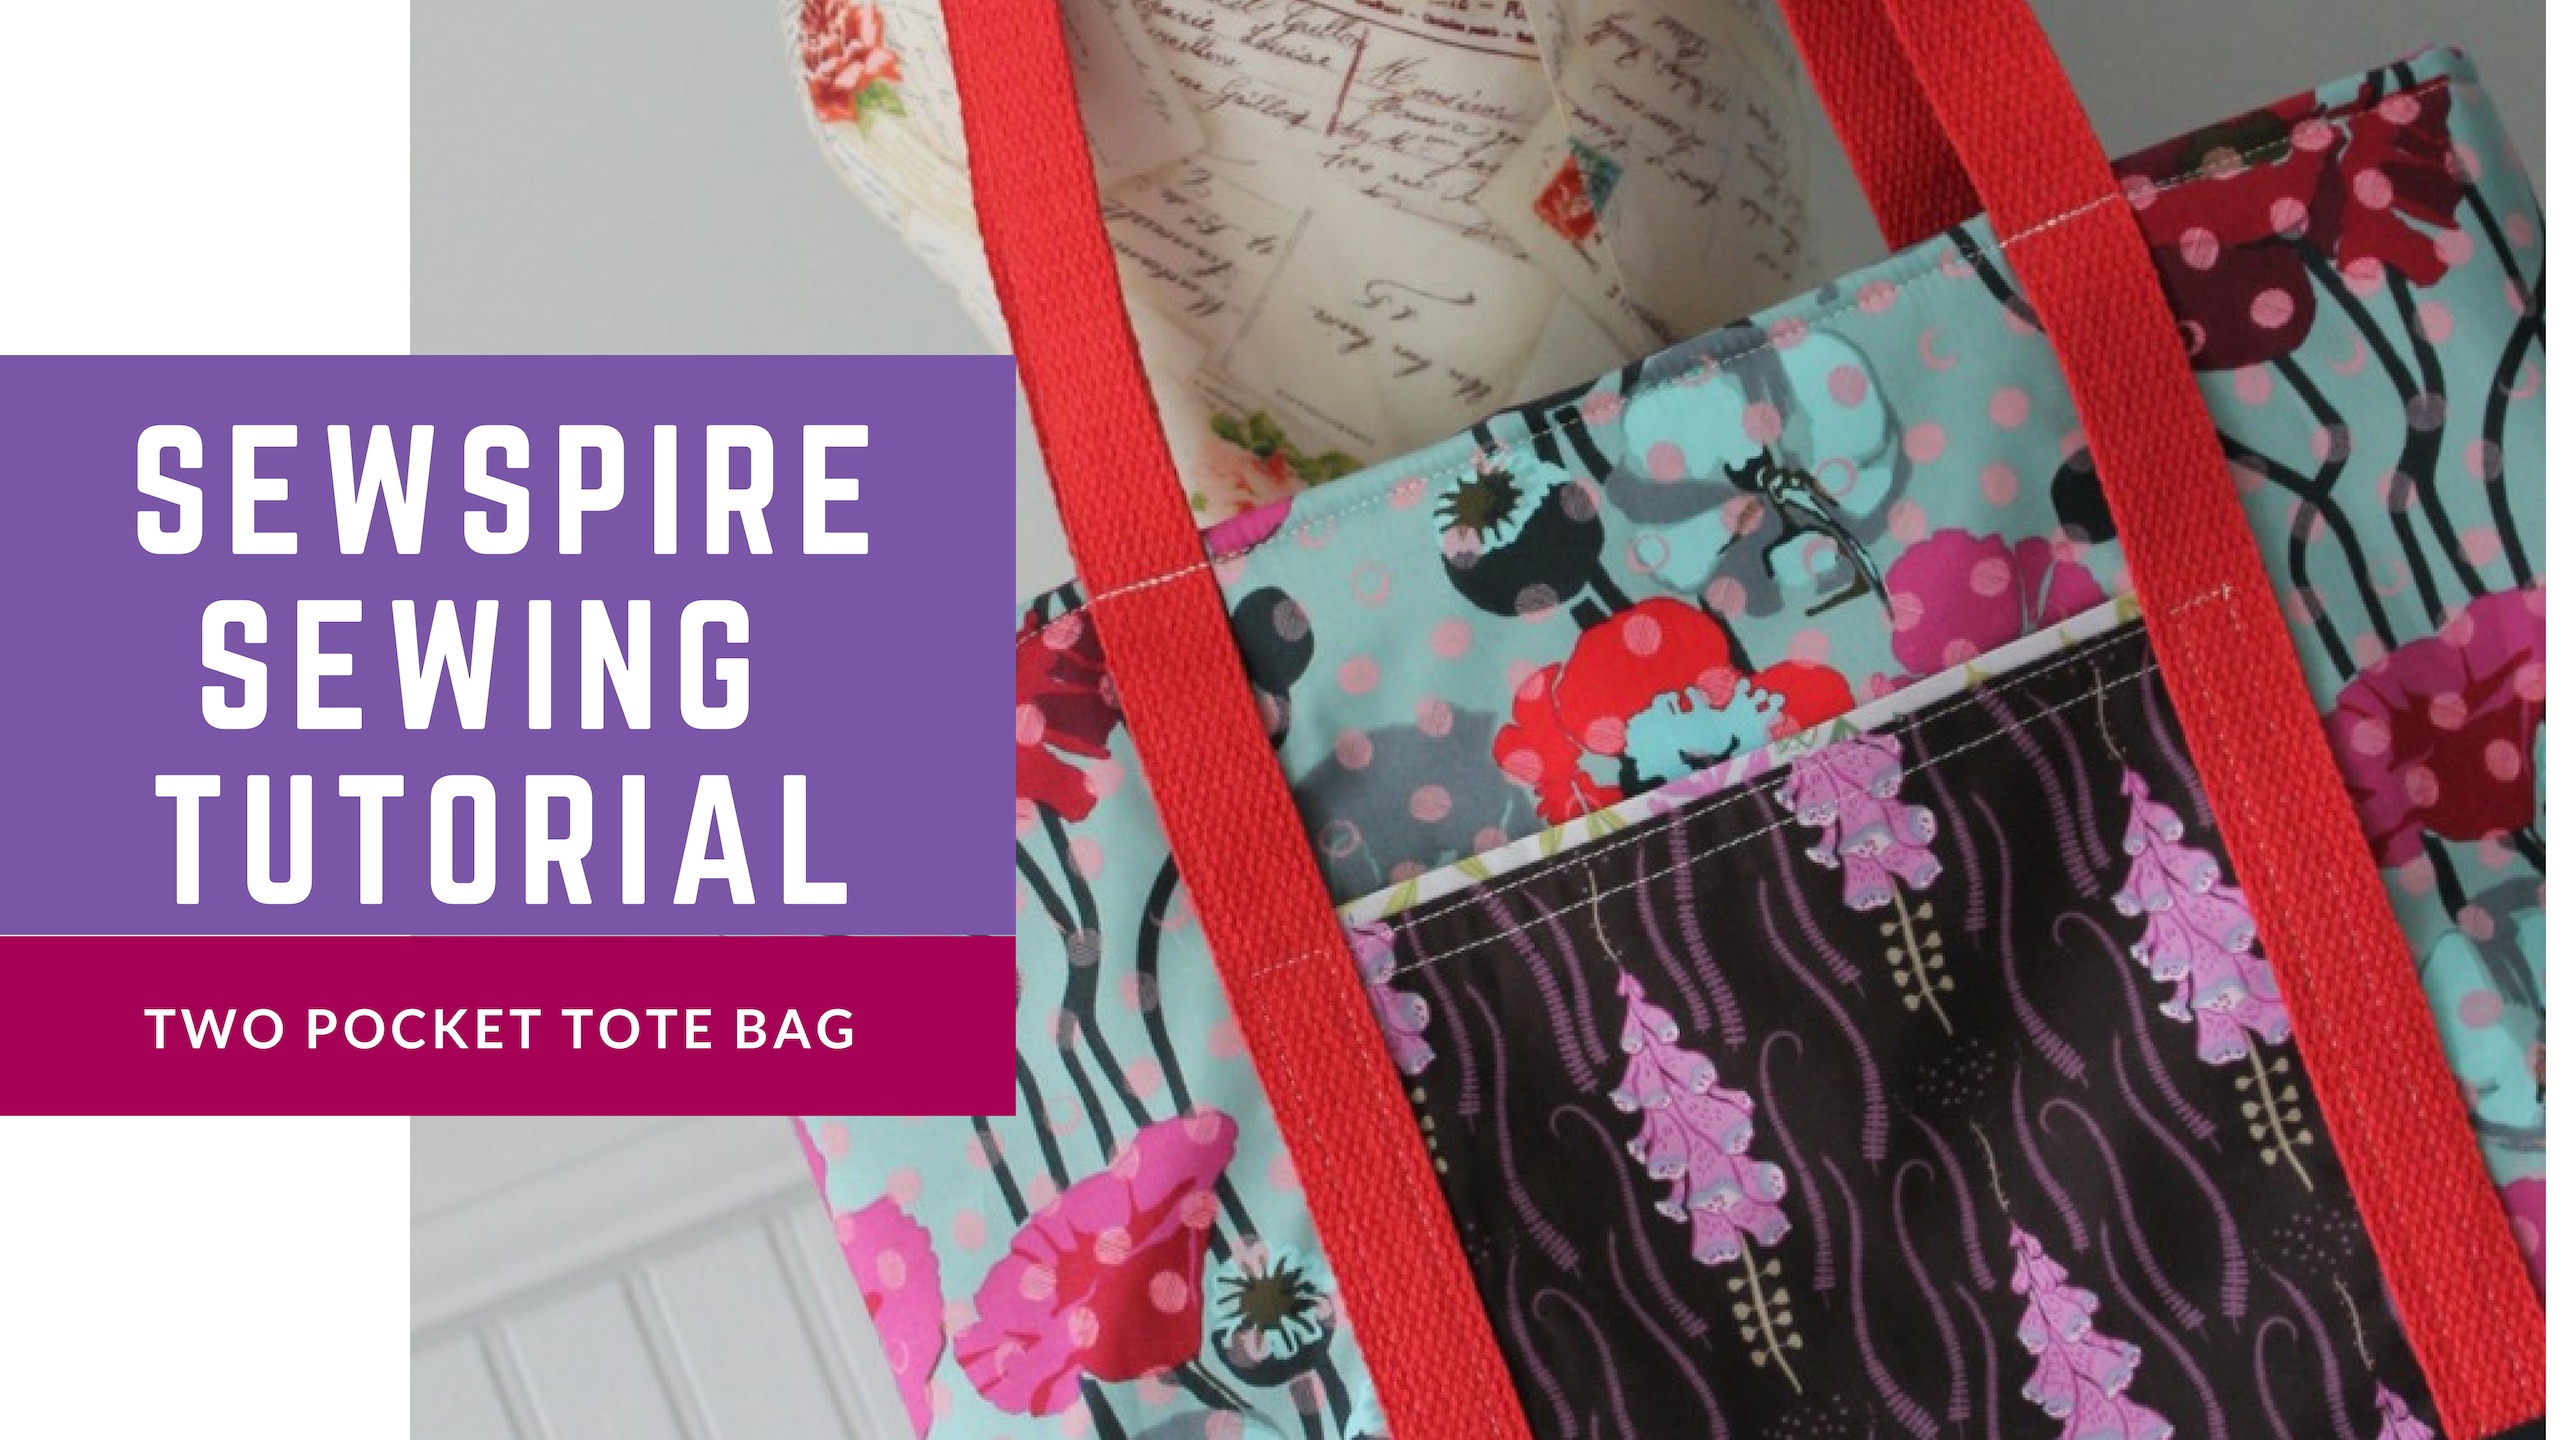 How to Sew a Two Pocket Tote Bag